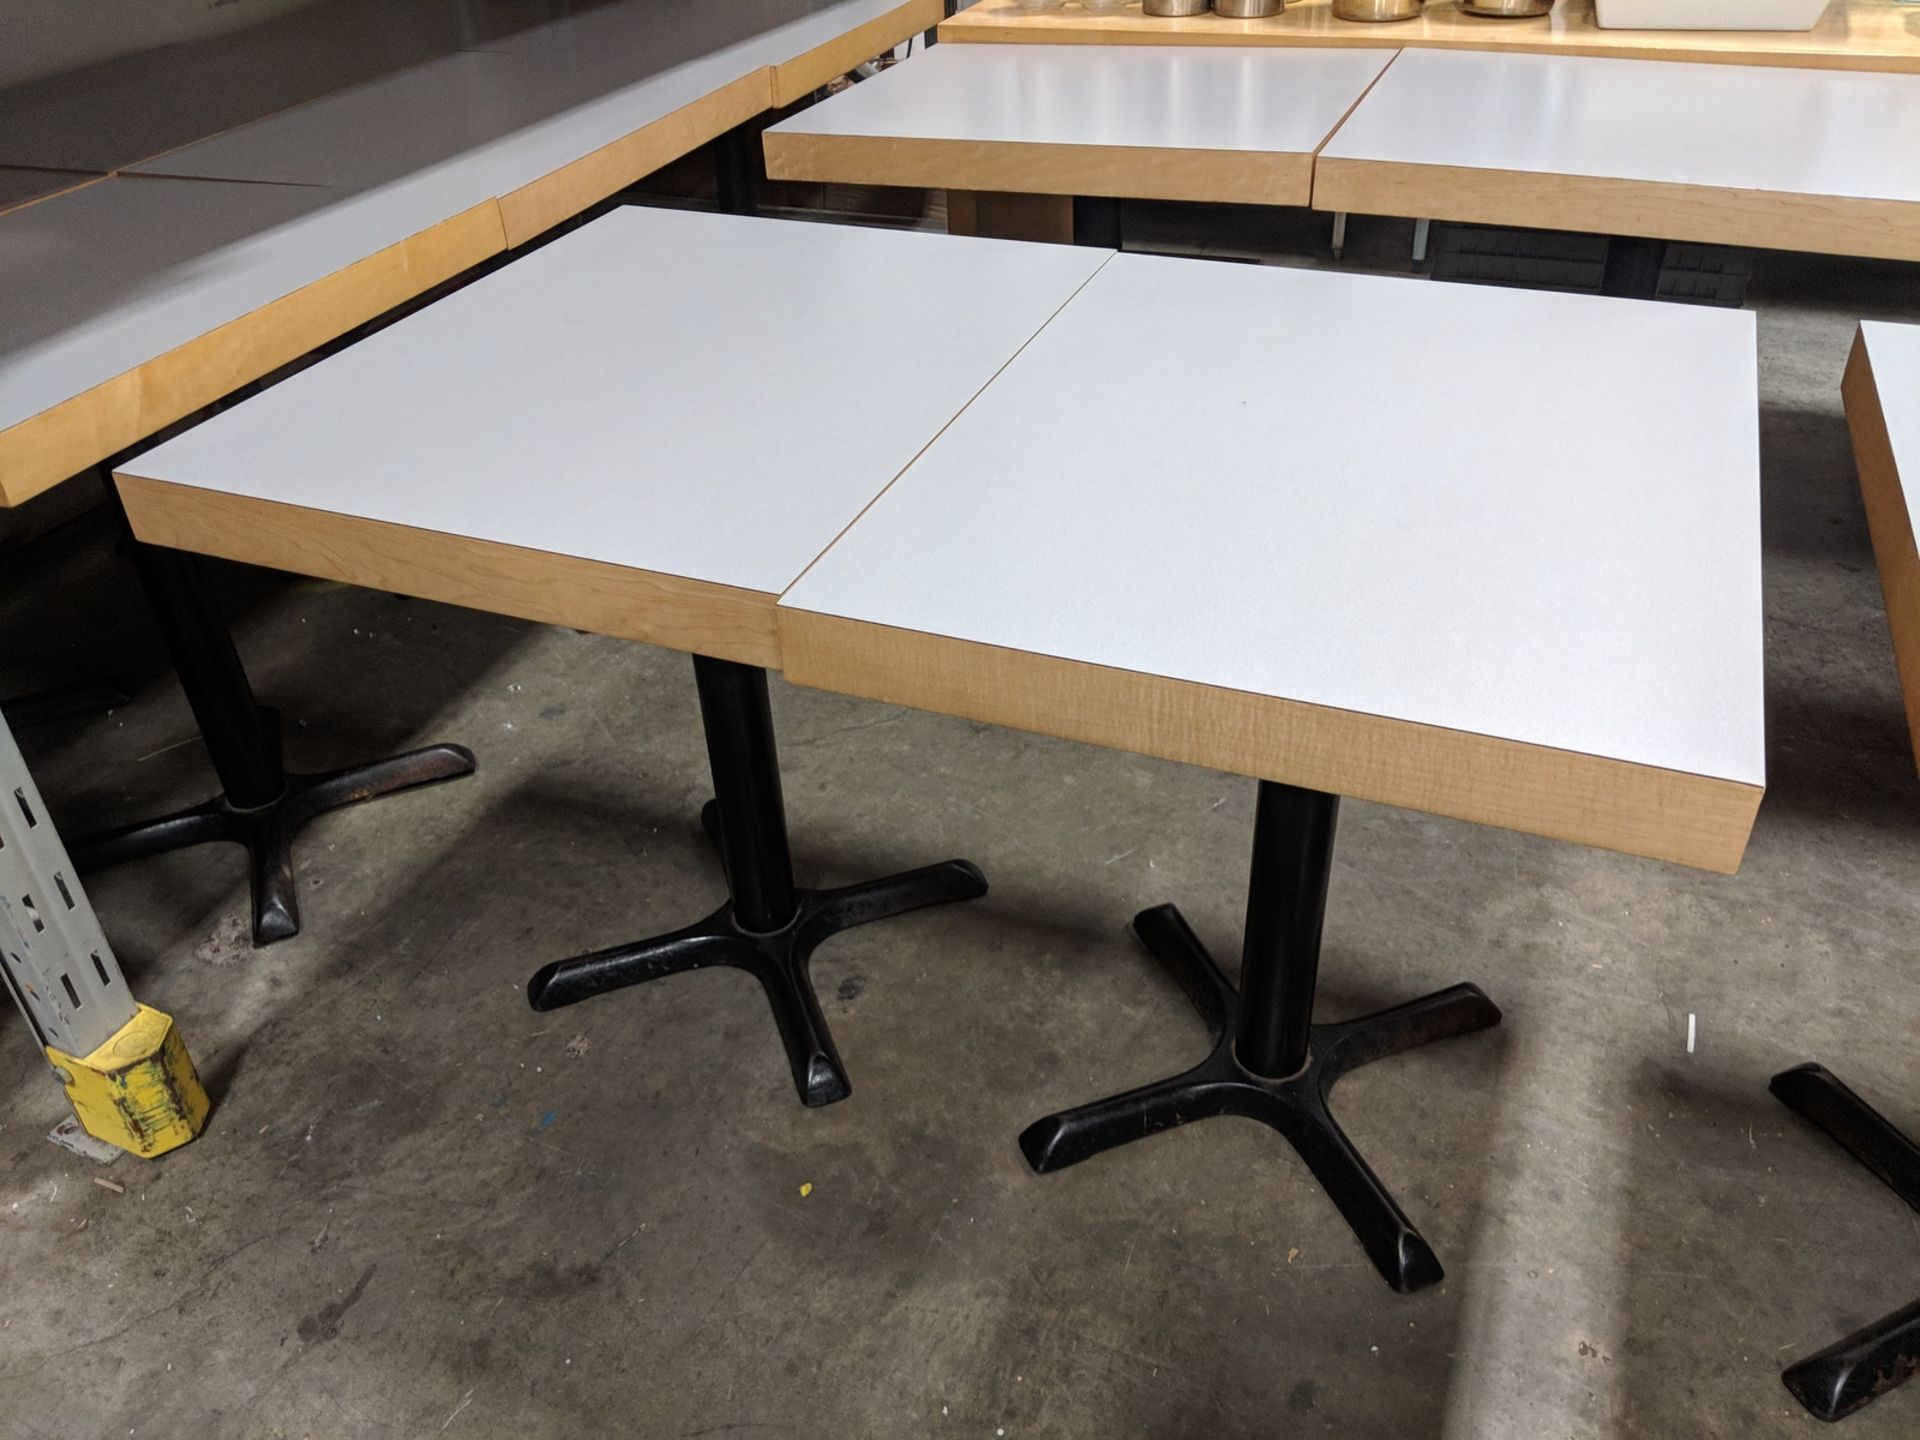 24" x 30" x 30" Dining Tables - Lot of 2 - Image 2 of 3